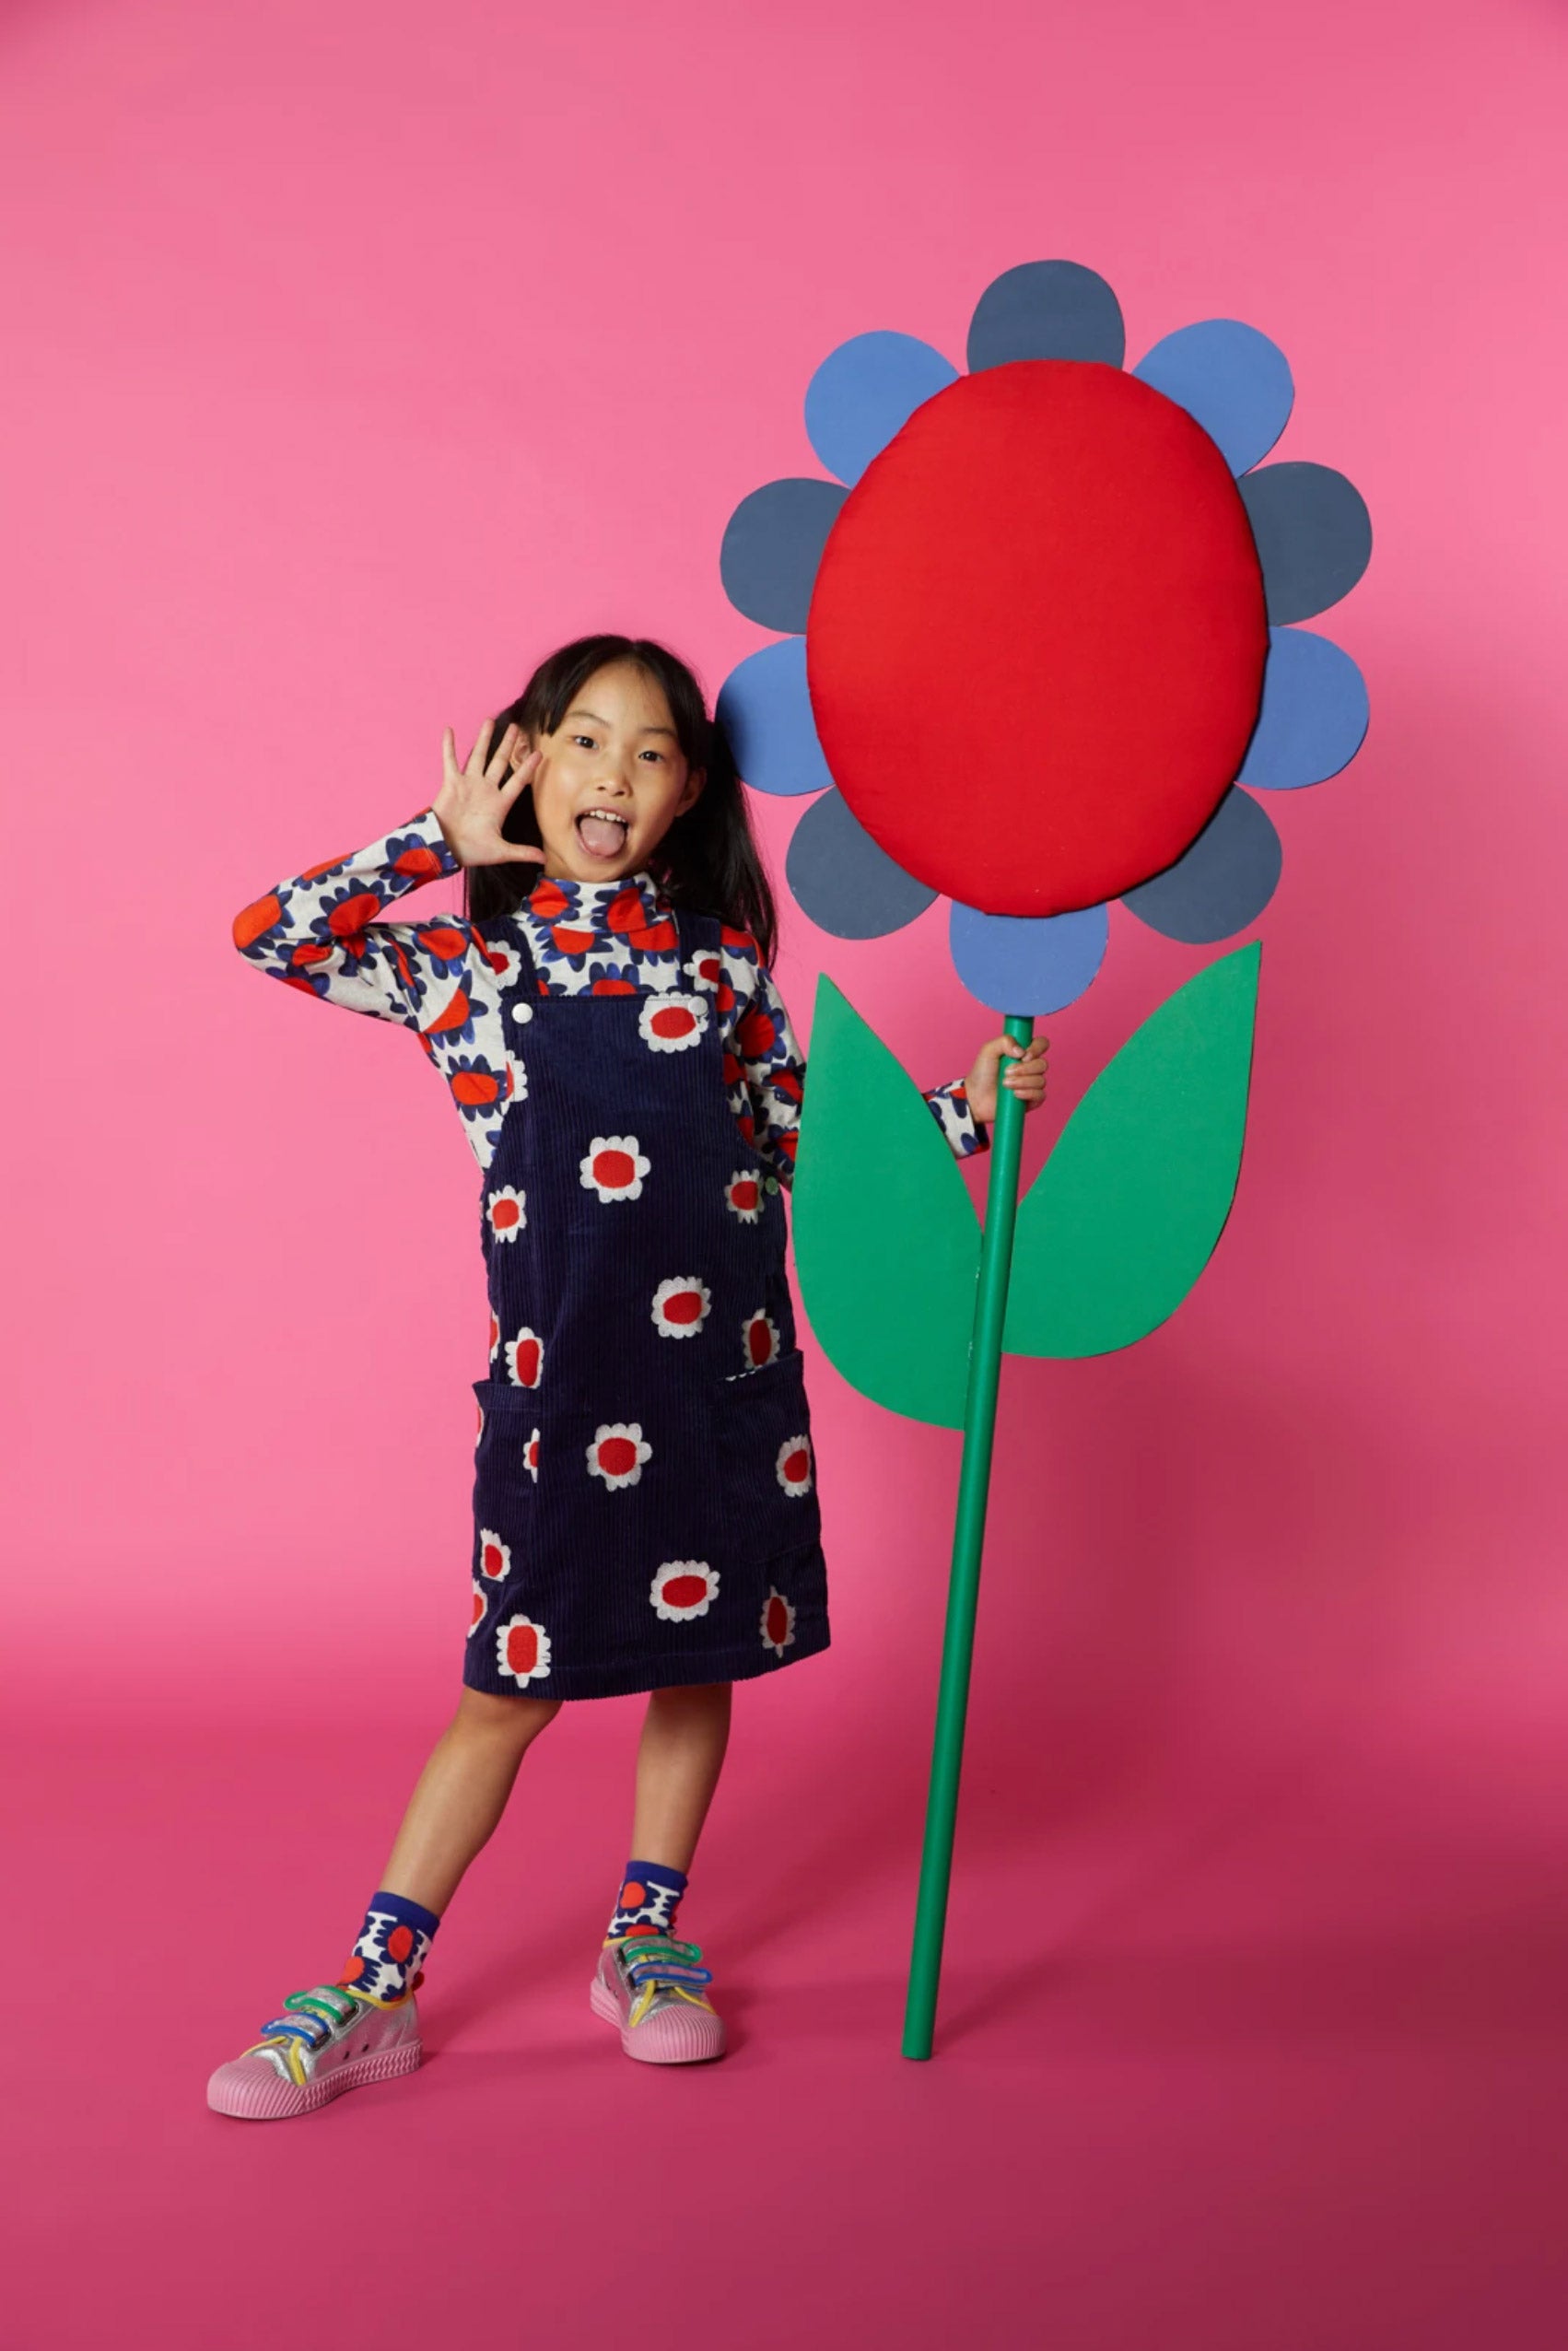 A girl in a colourful outfit stands against a dark pink background with an oversized wooden flower prop.